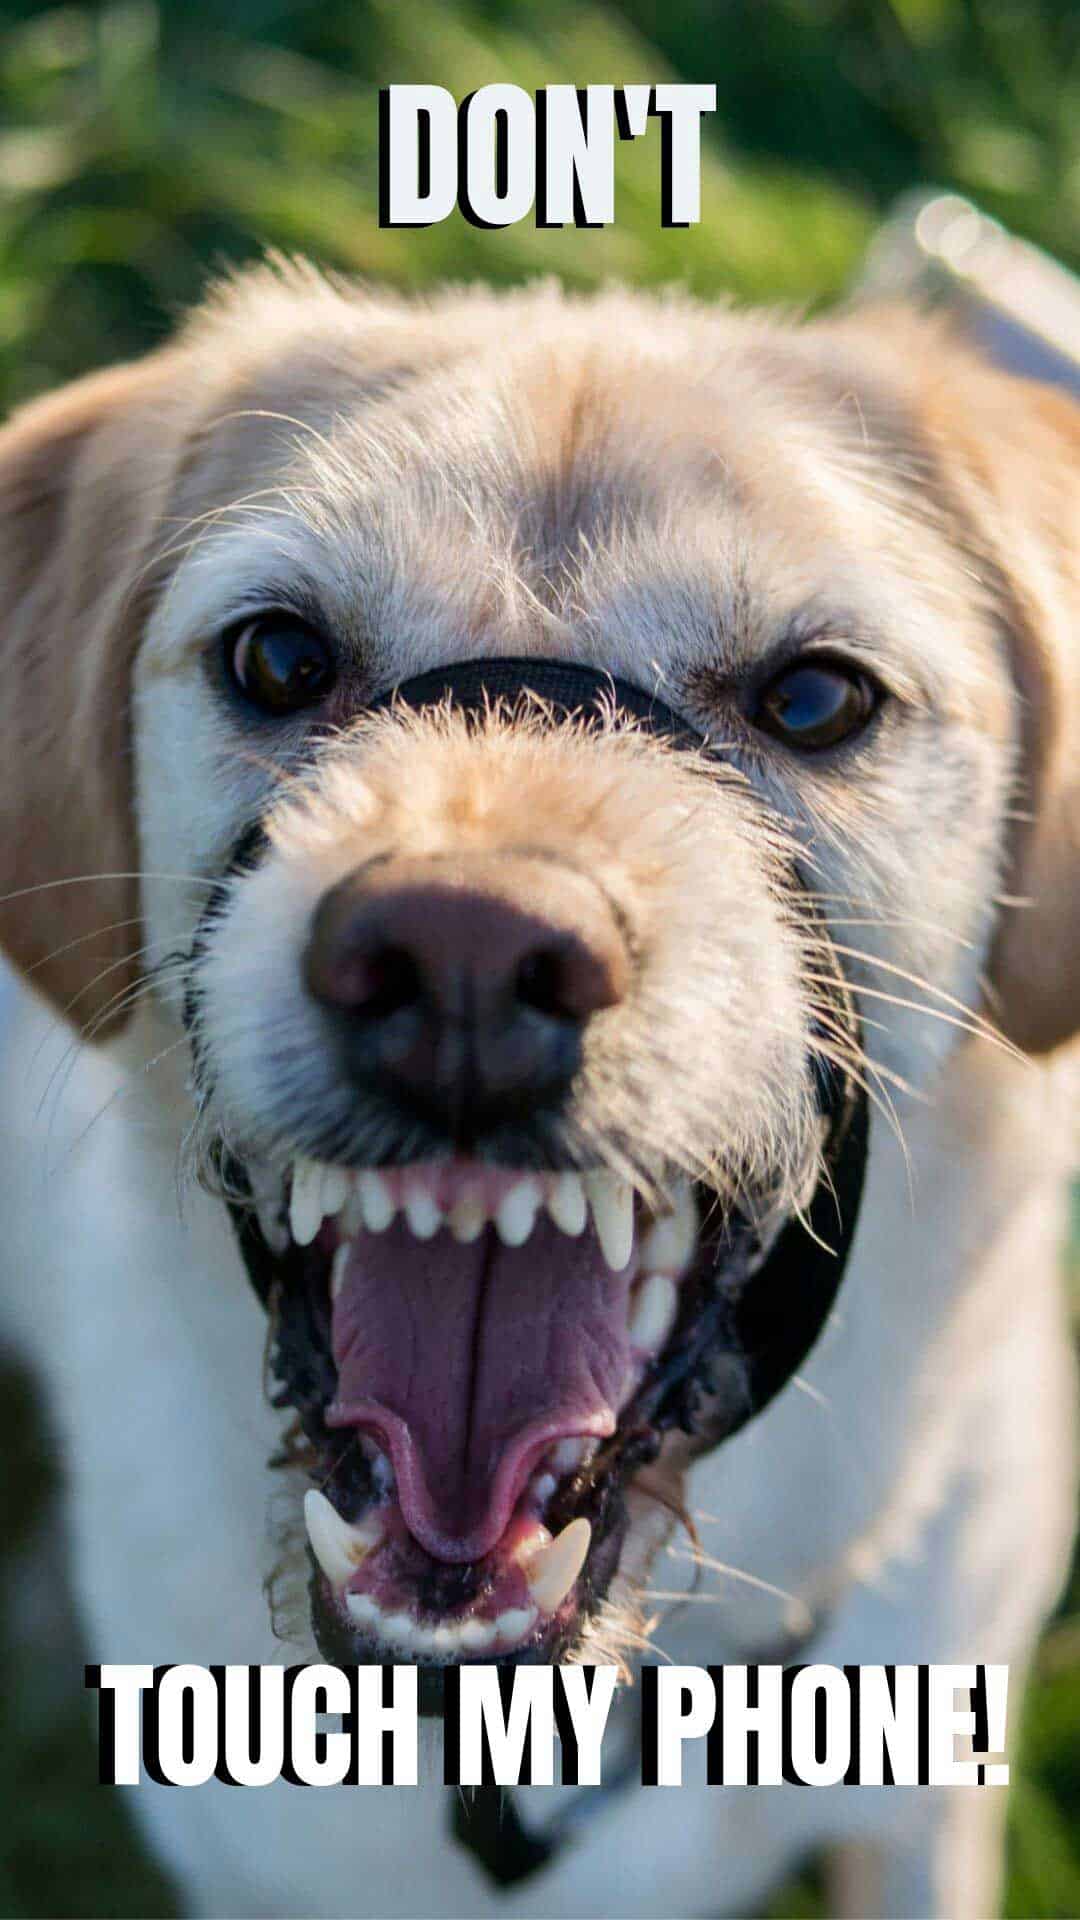 Dont Touch My Phone Wallpaper With A Scary Looking - Dogs Biting - HD Wallpaper 